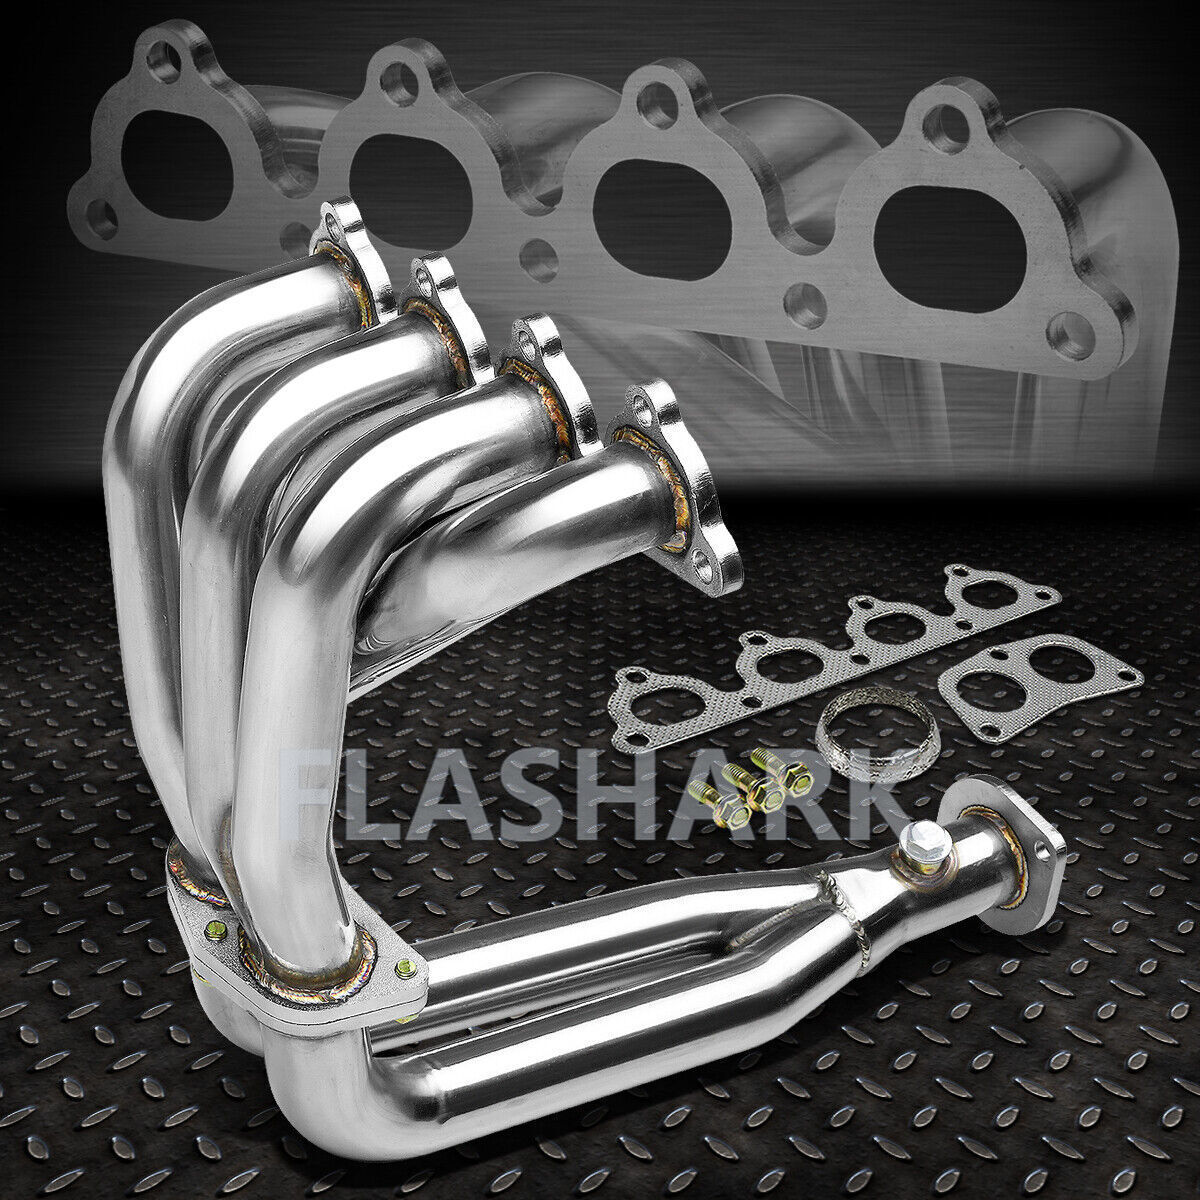 FLASHARK FOR 88-00 HONDA CIVIC CRX DEL SOL D-SERIES l4 STAINLESS HEADER EXHAUST